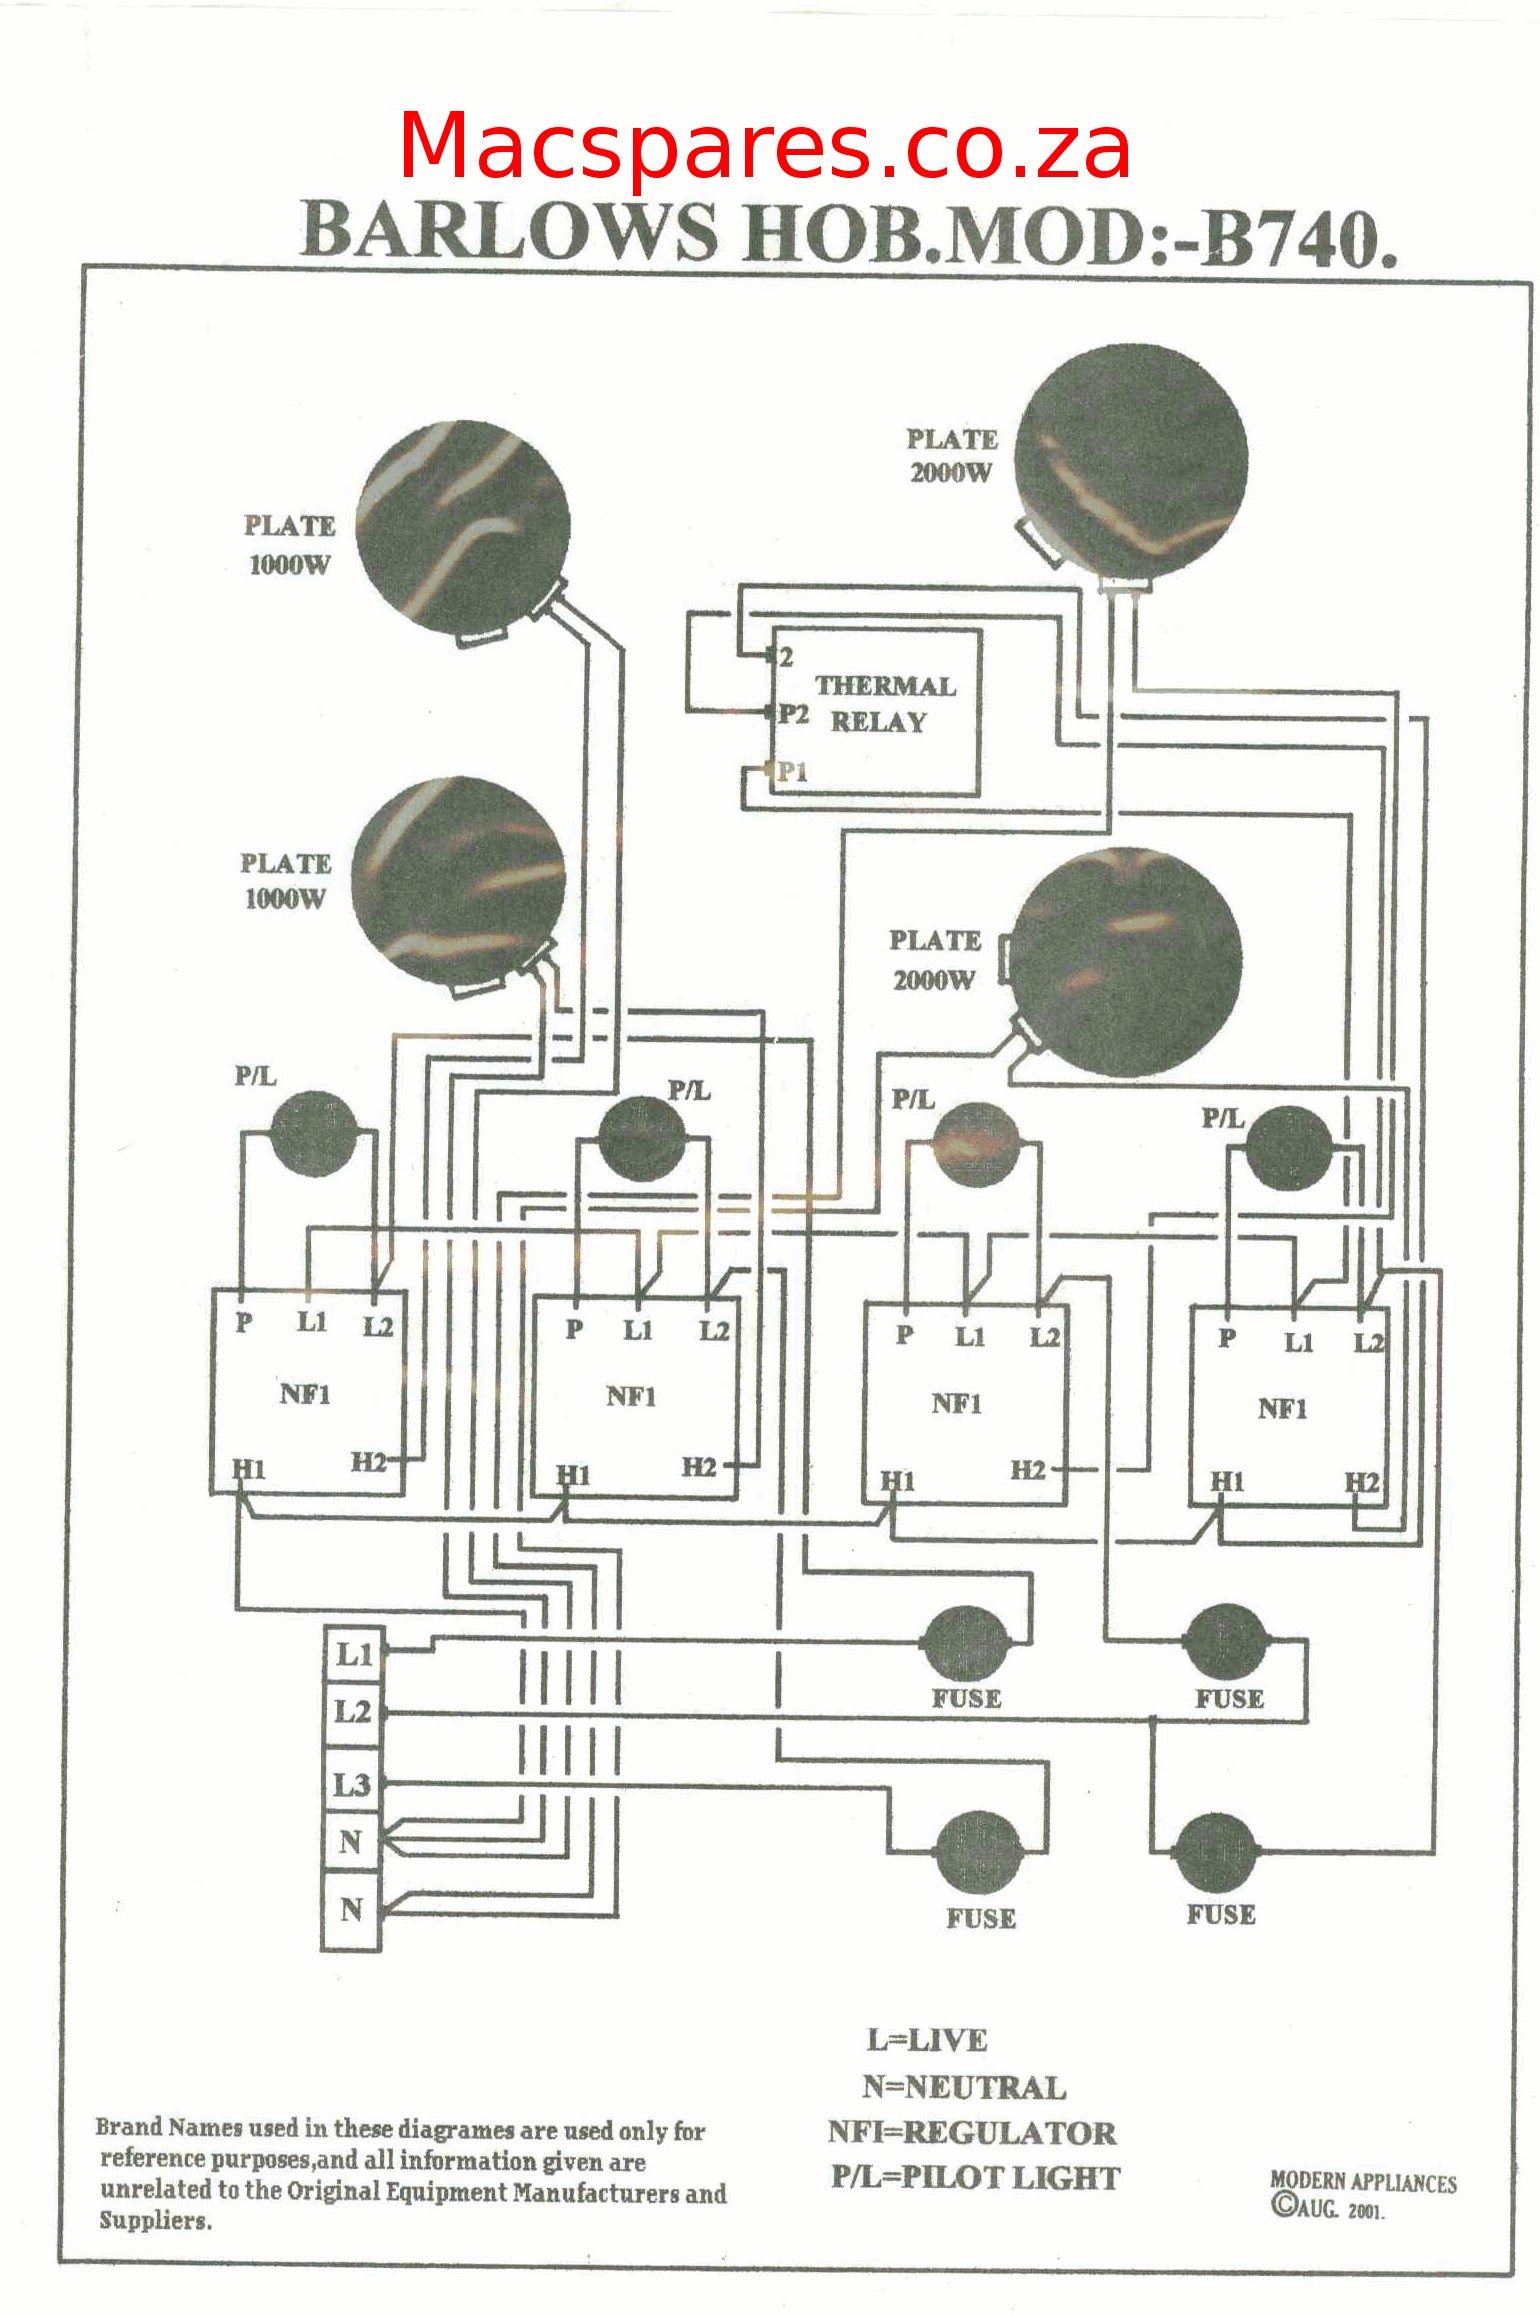 Wiring Diagram How To Wire An Electric Cooker Striking